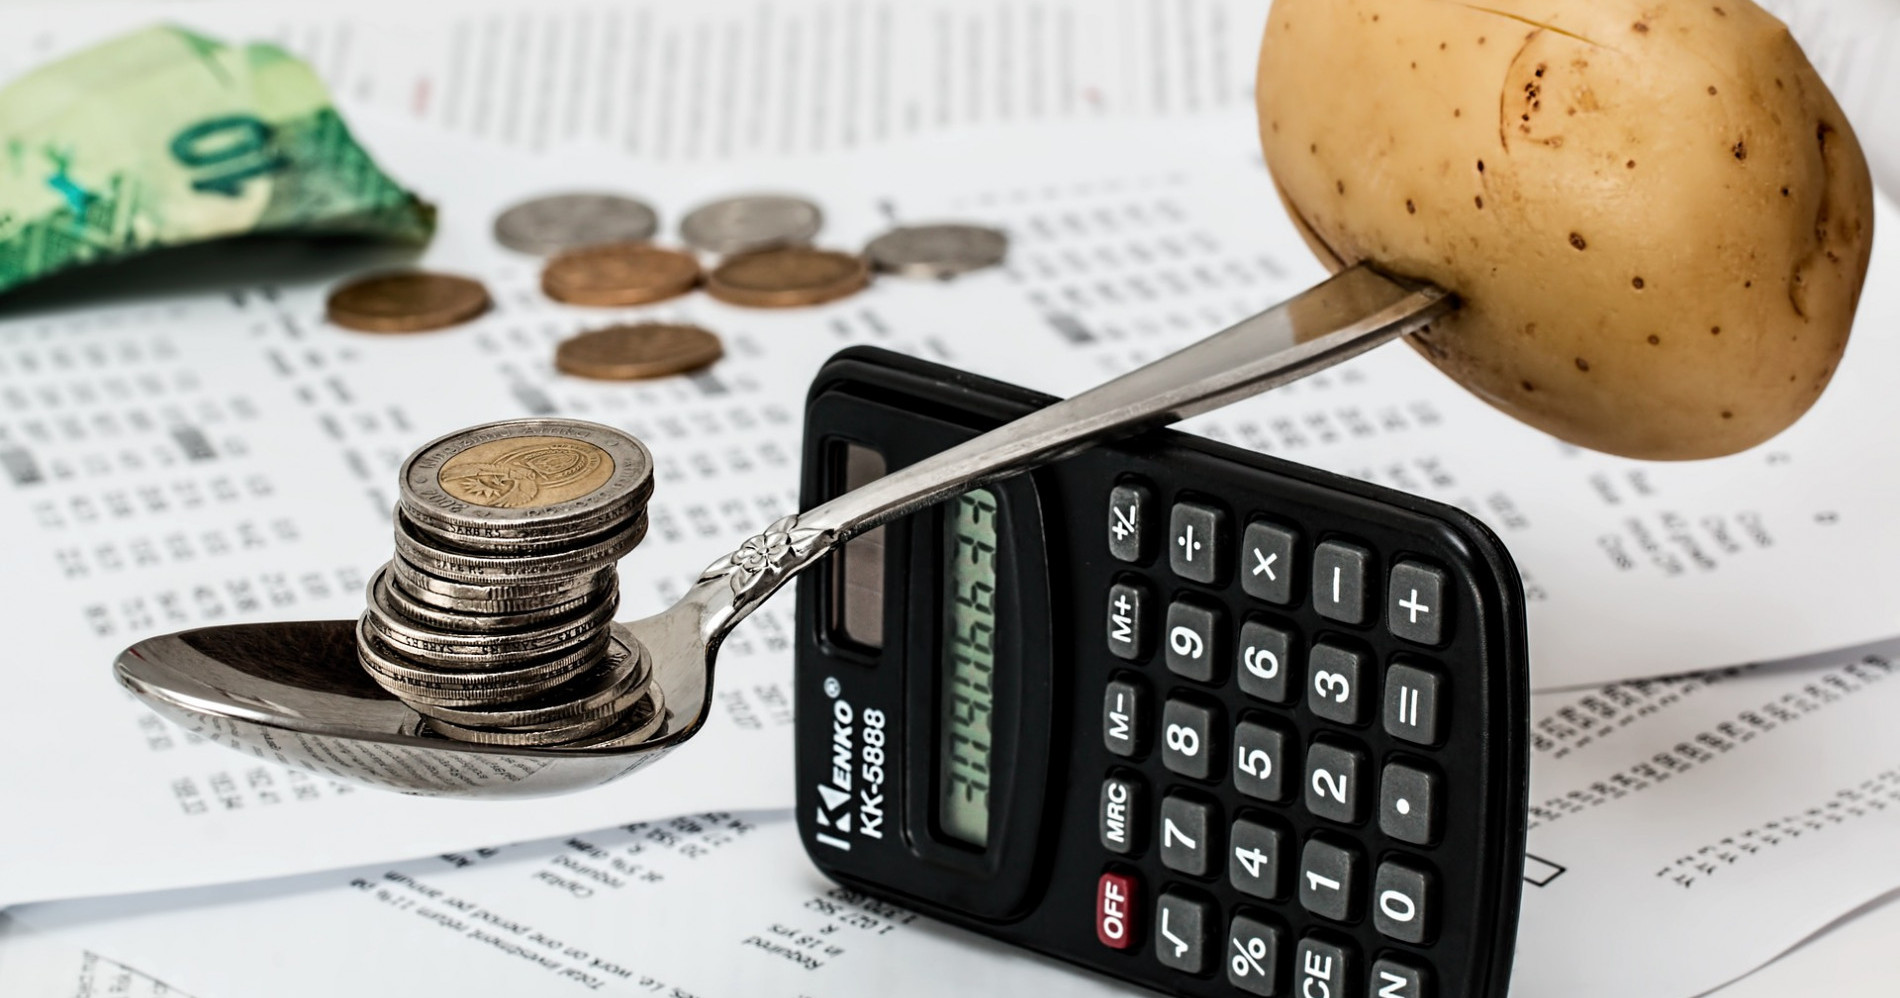 Calculator Budget (Sumber gamnar: Image by Steve Buissinne from Pixabay)